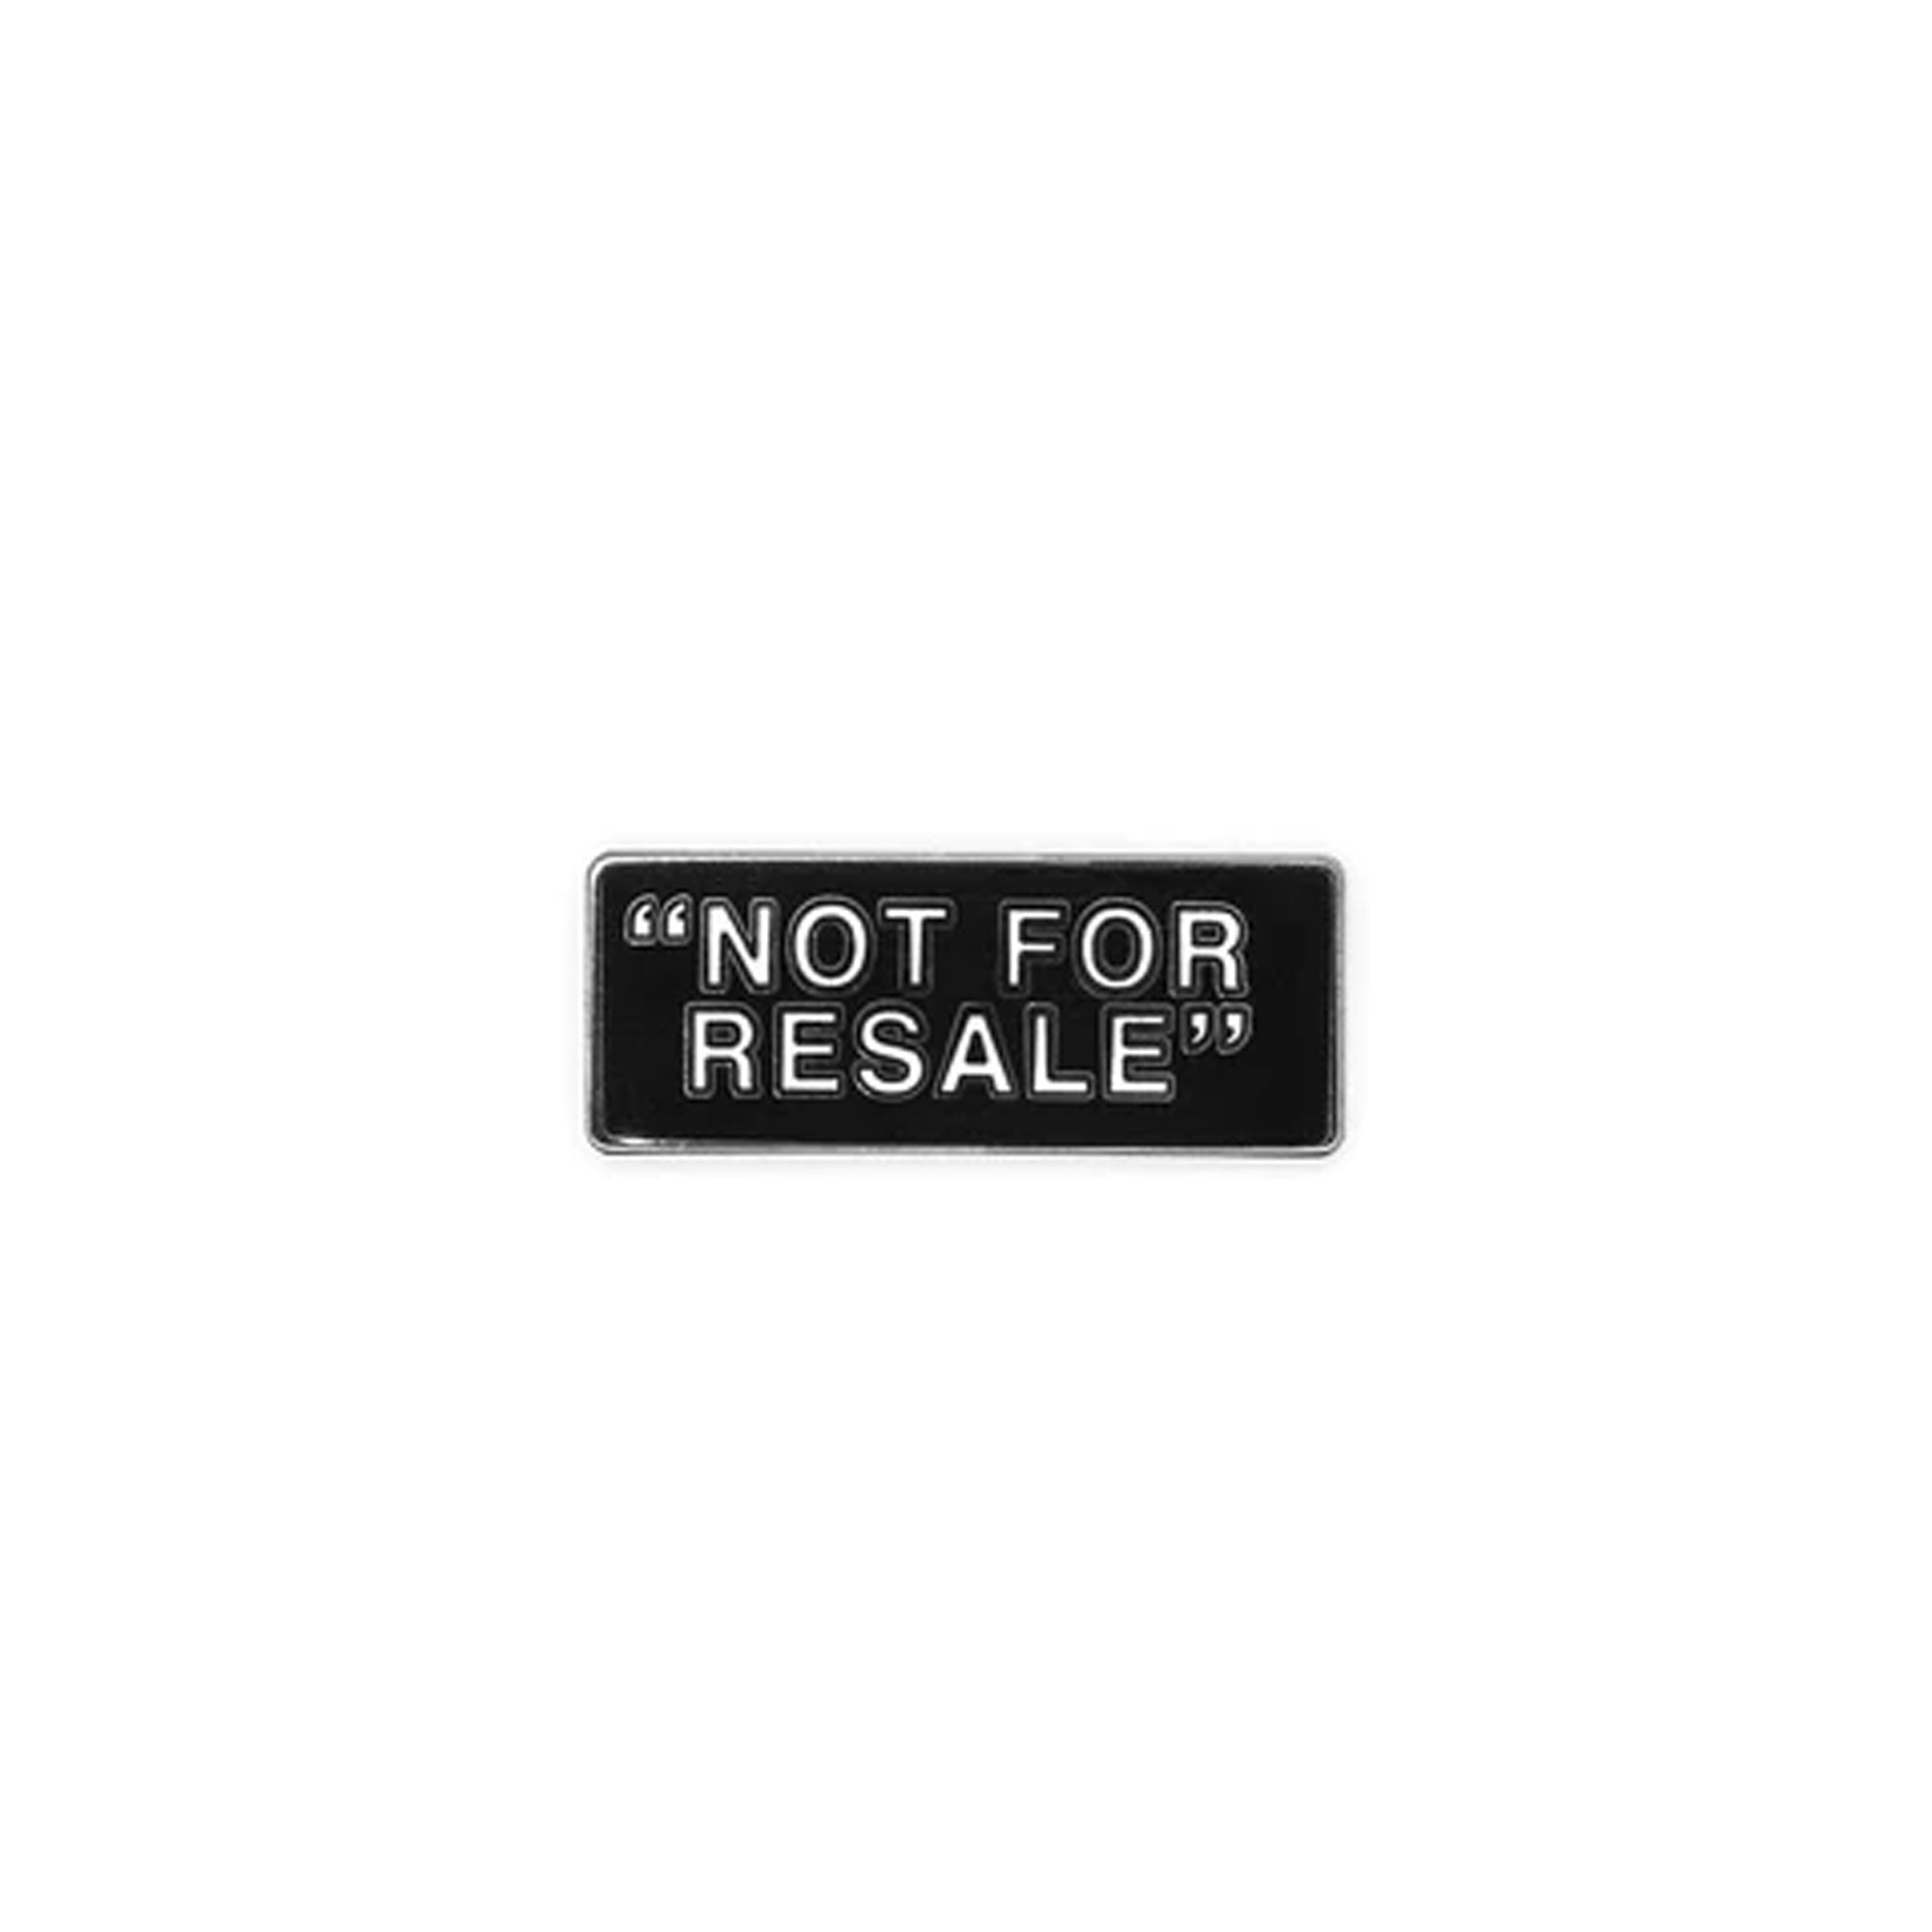 Hdqtrs Not For Resale Pin